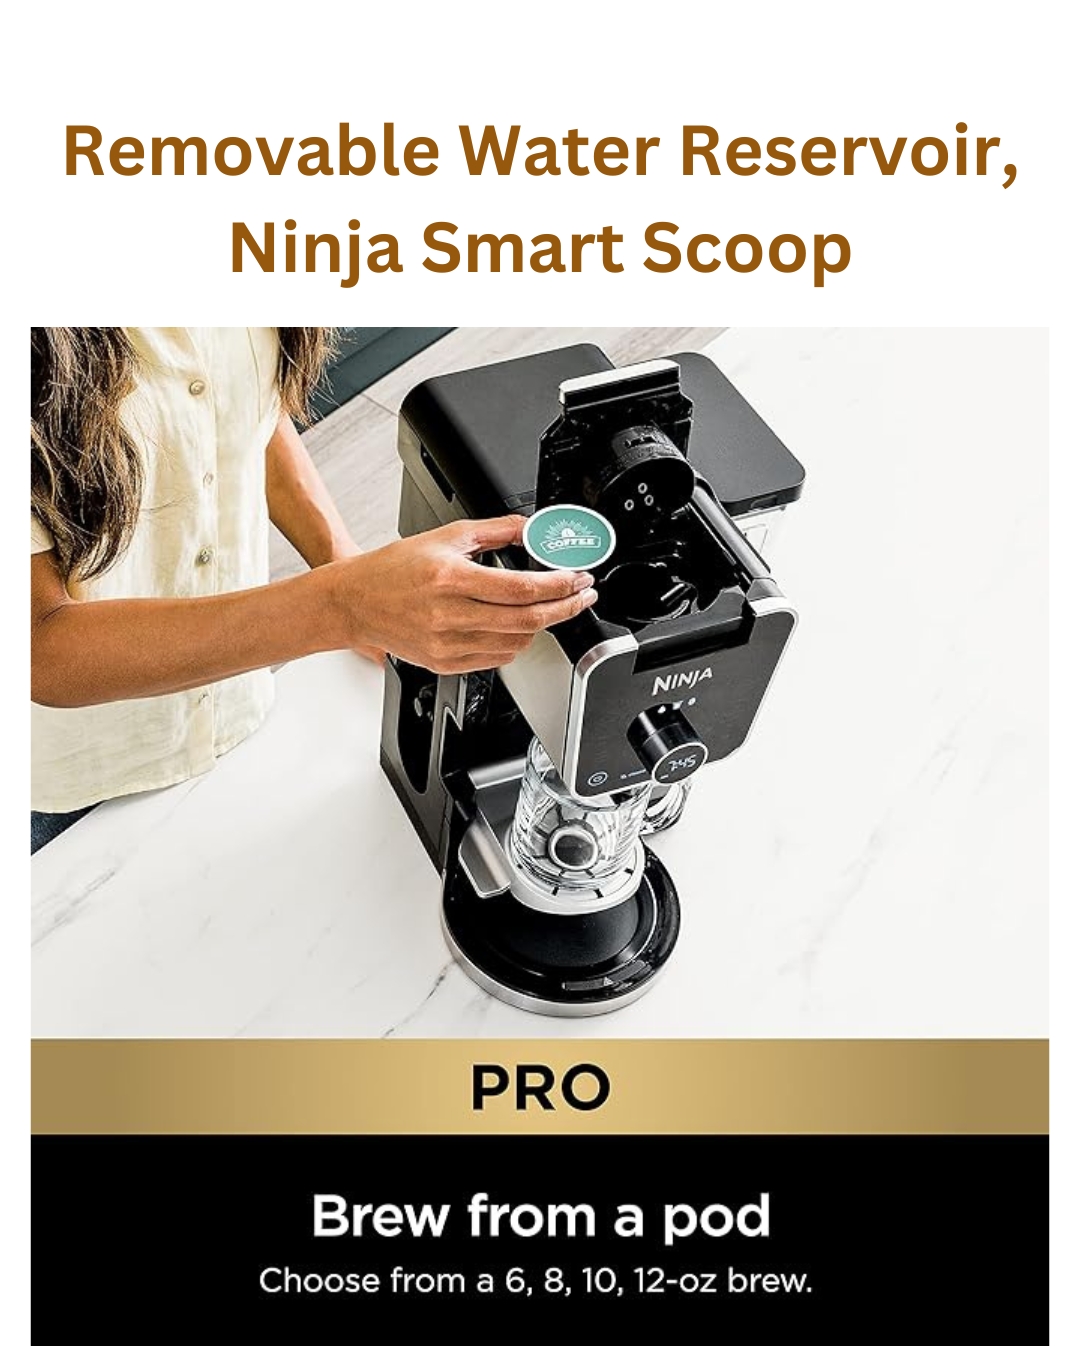 DualBrew Pro Specialty Coffee Maker